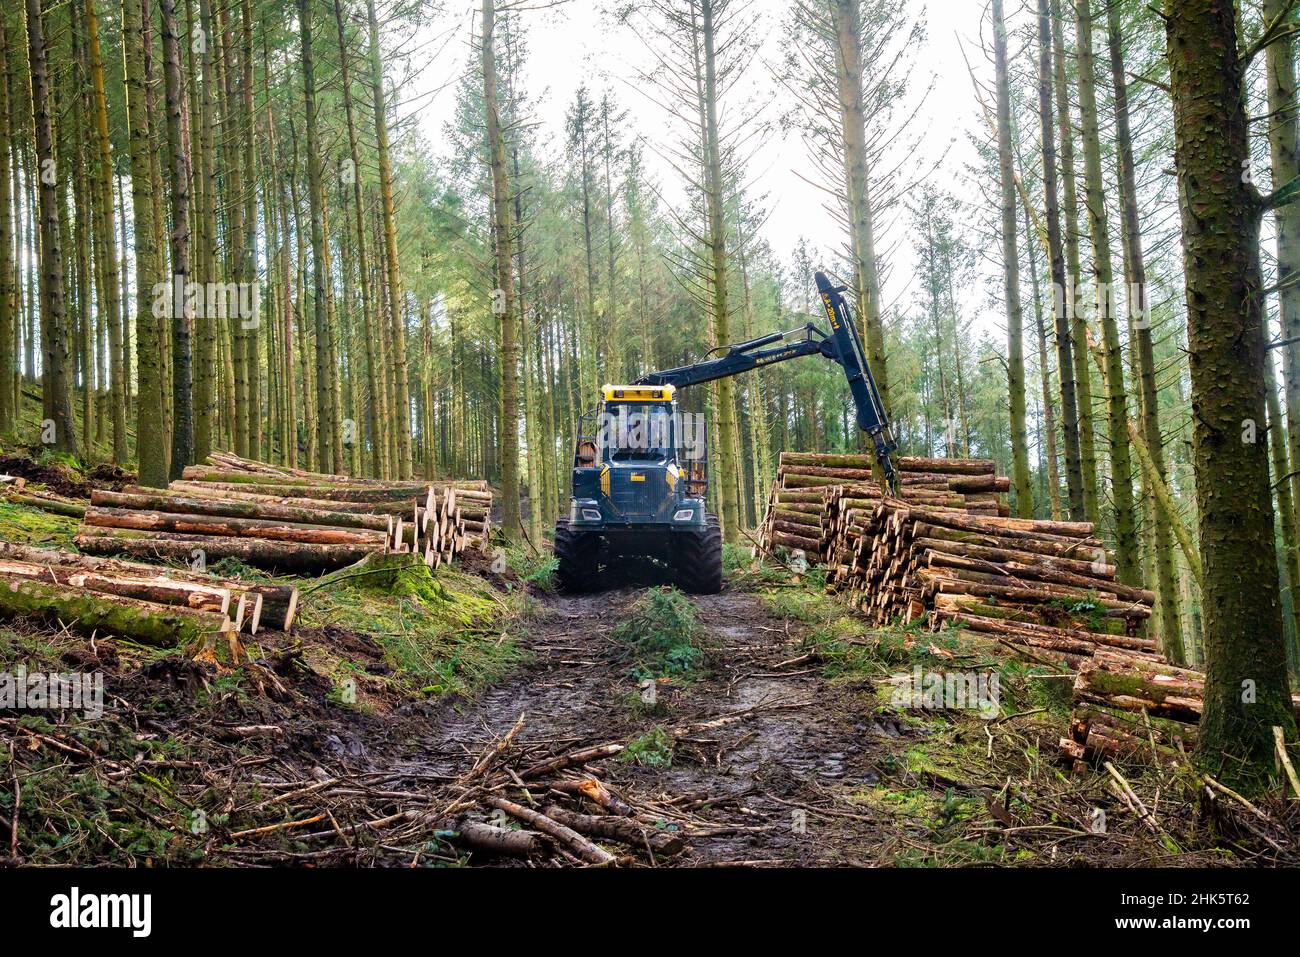 A Ponsse Wisent Forwarder forestry harvester working on Beacon Fell, Preston, Lancashire, UK Stock Photo